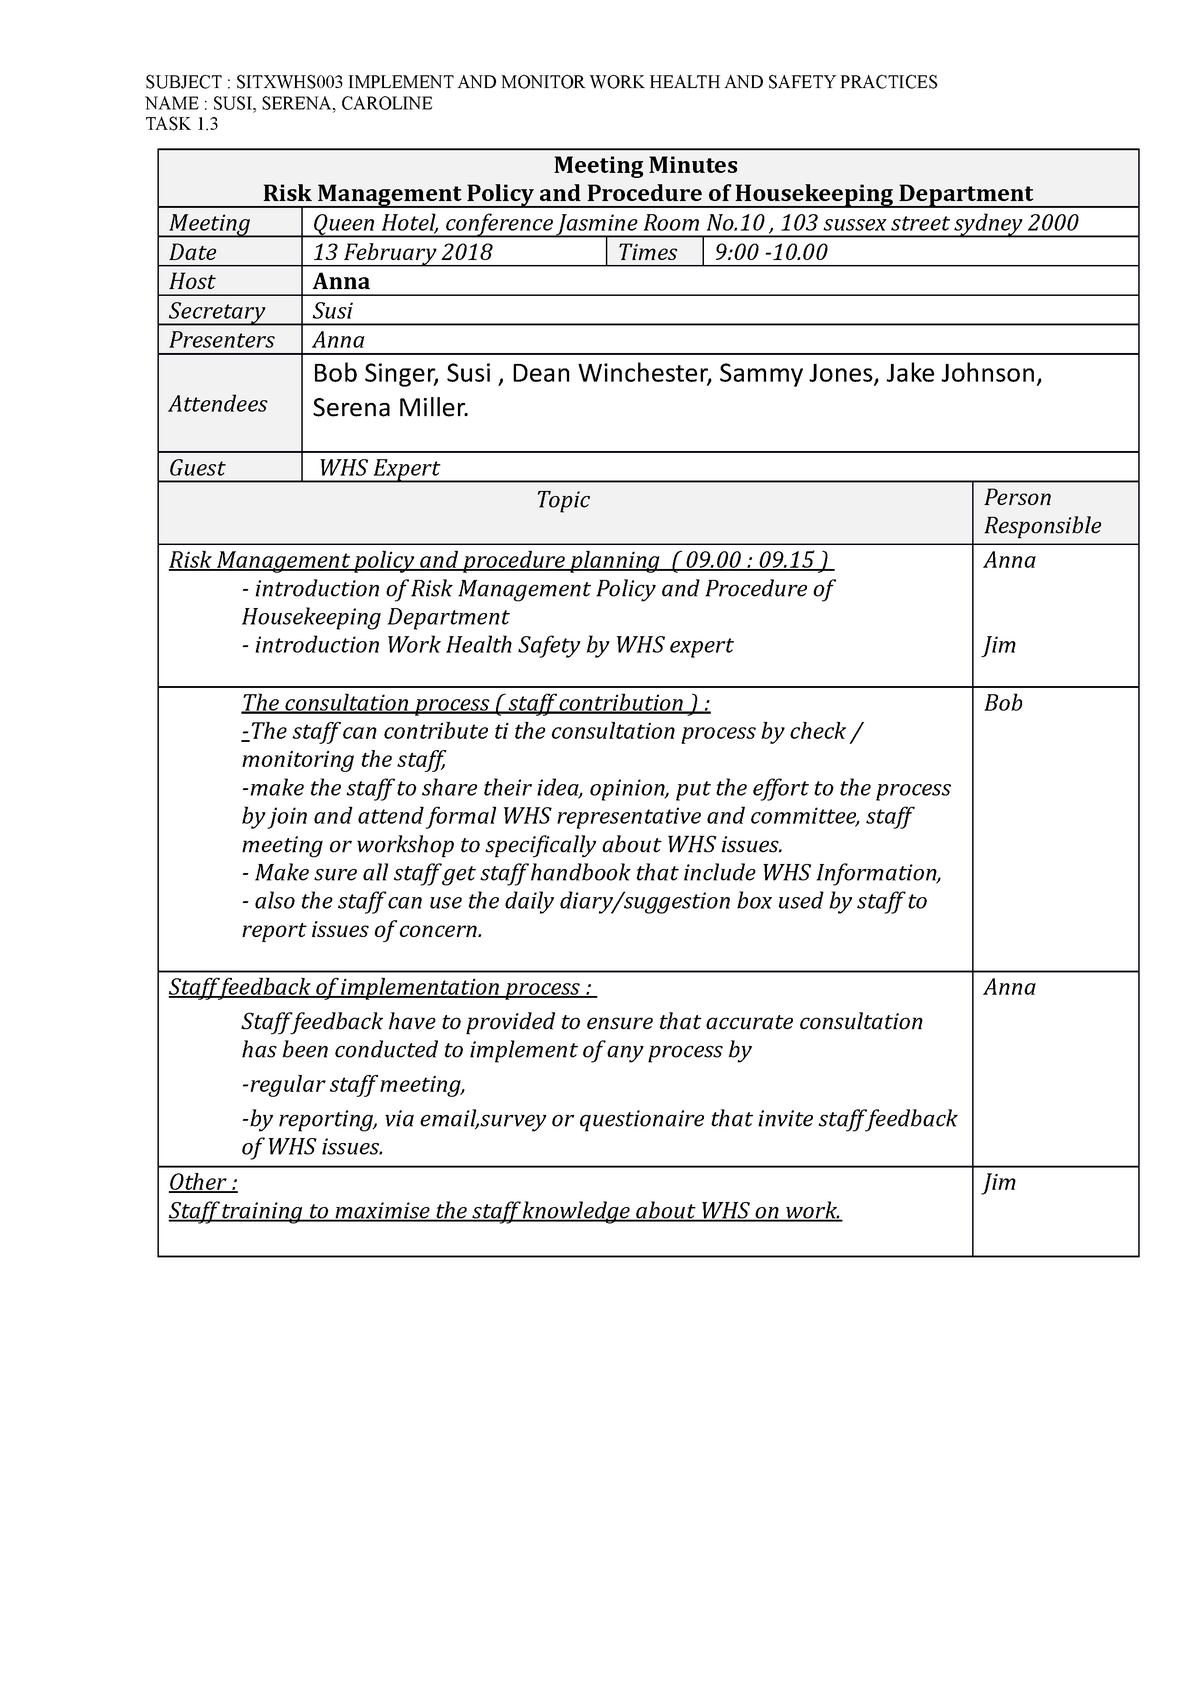 Meeting Minutes Template 1 - SUBJECT : SITXWHS003 IMPLEMENT AND MONITOR ...